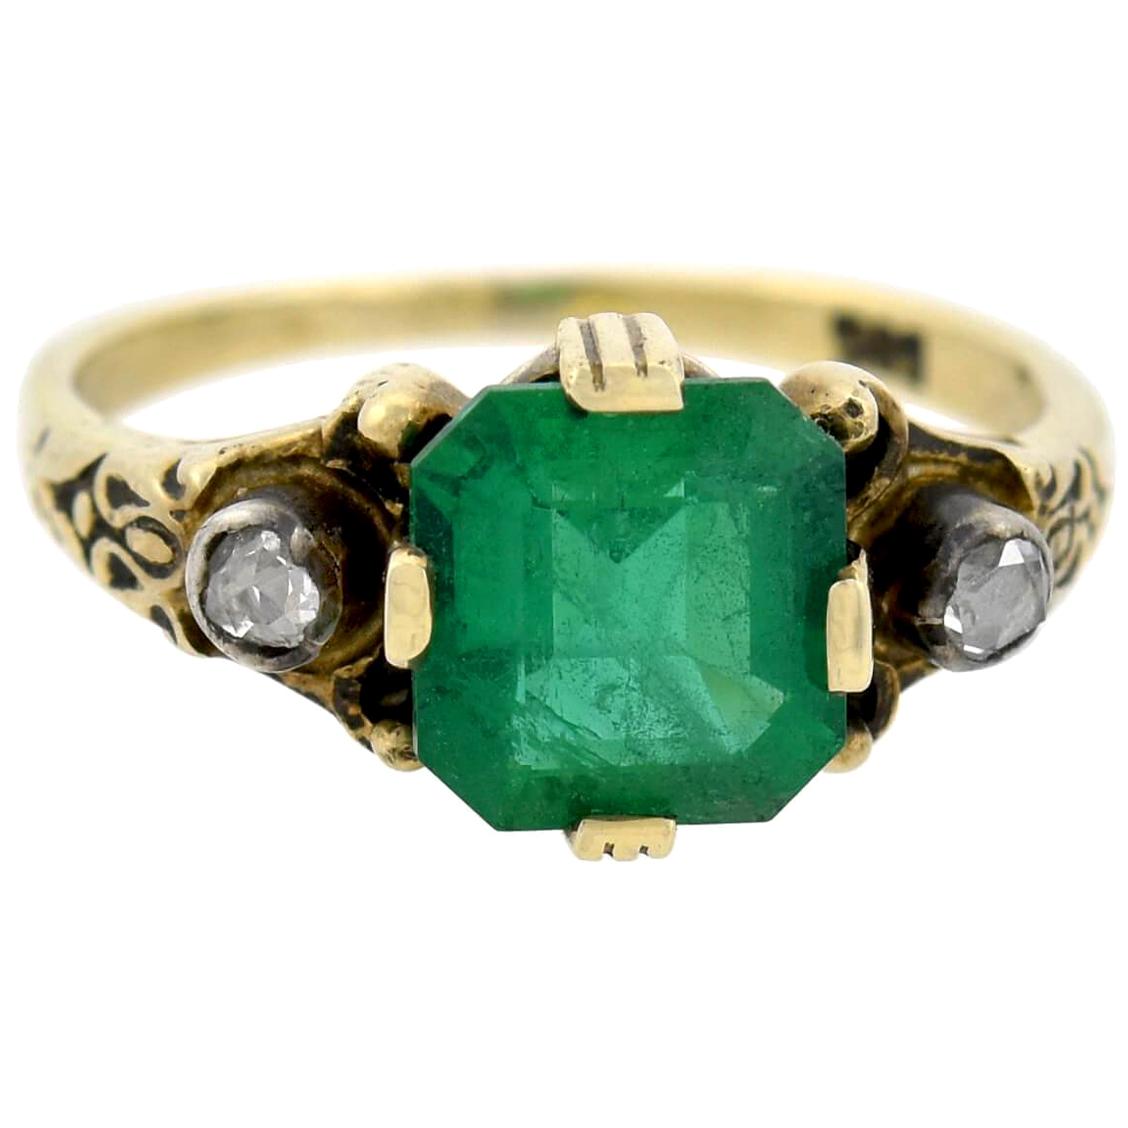 Edwardian 2.00 Total Carat Colombian Emerald and Diamond Ring